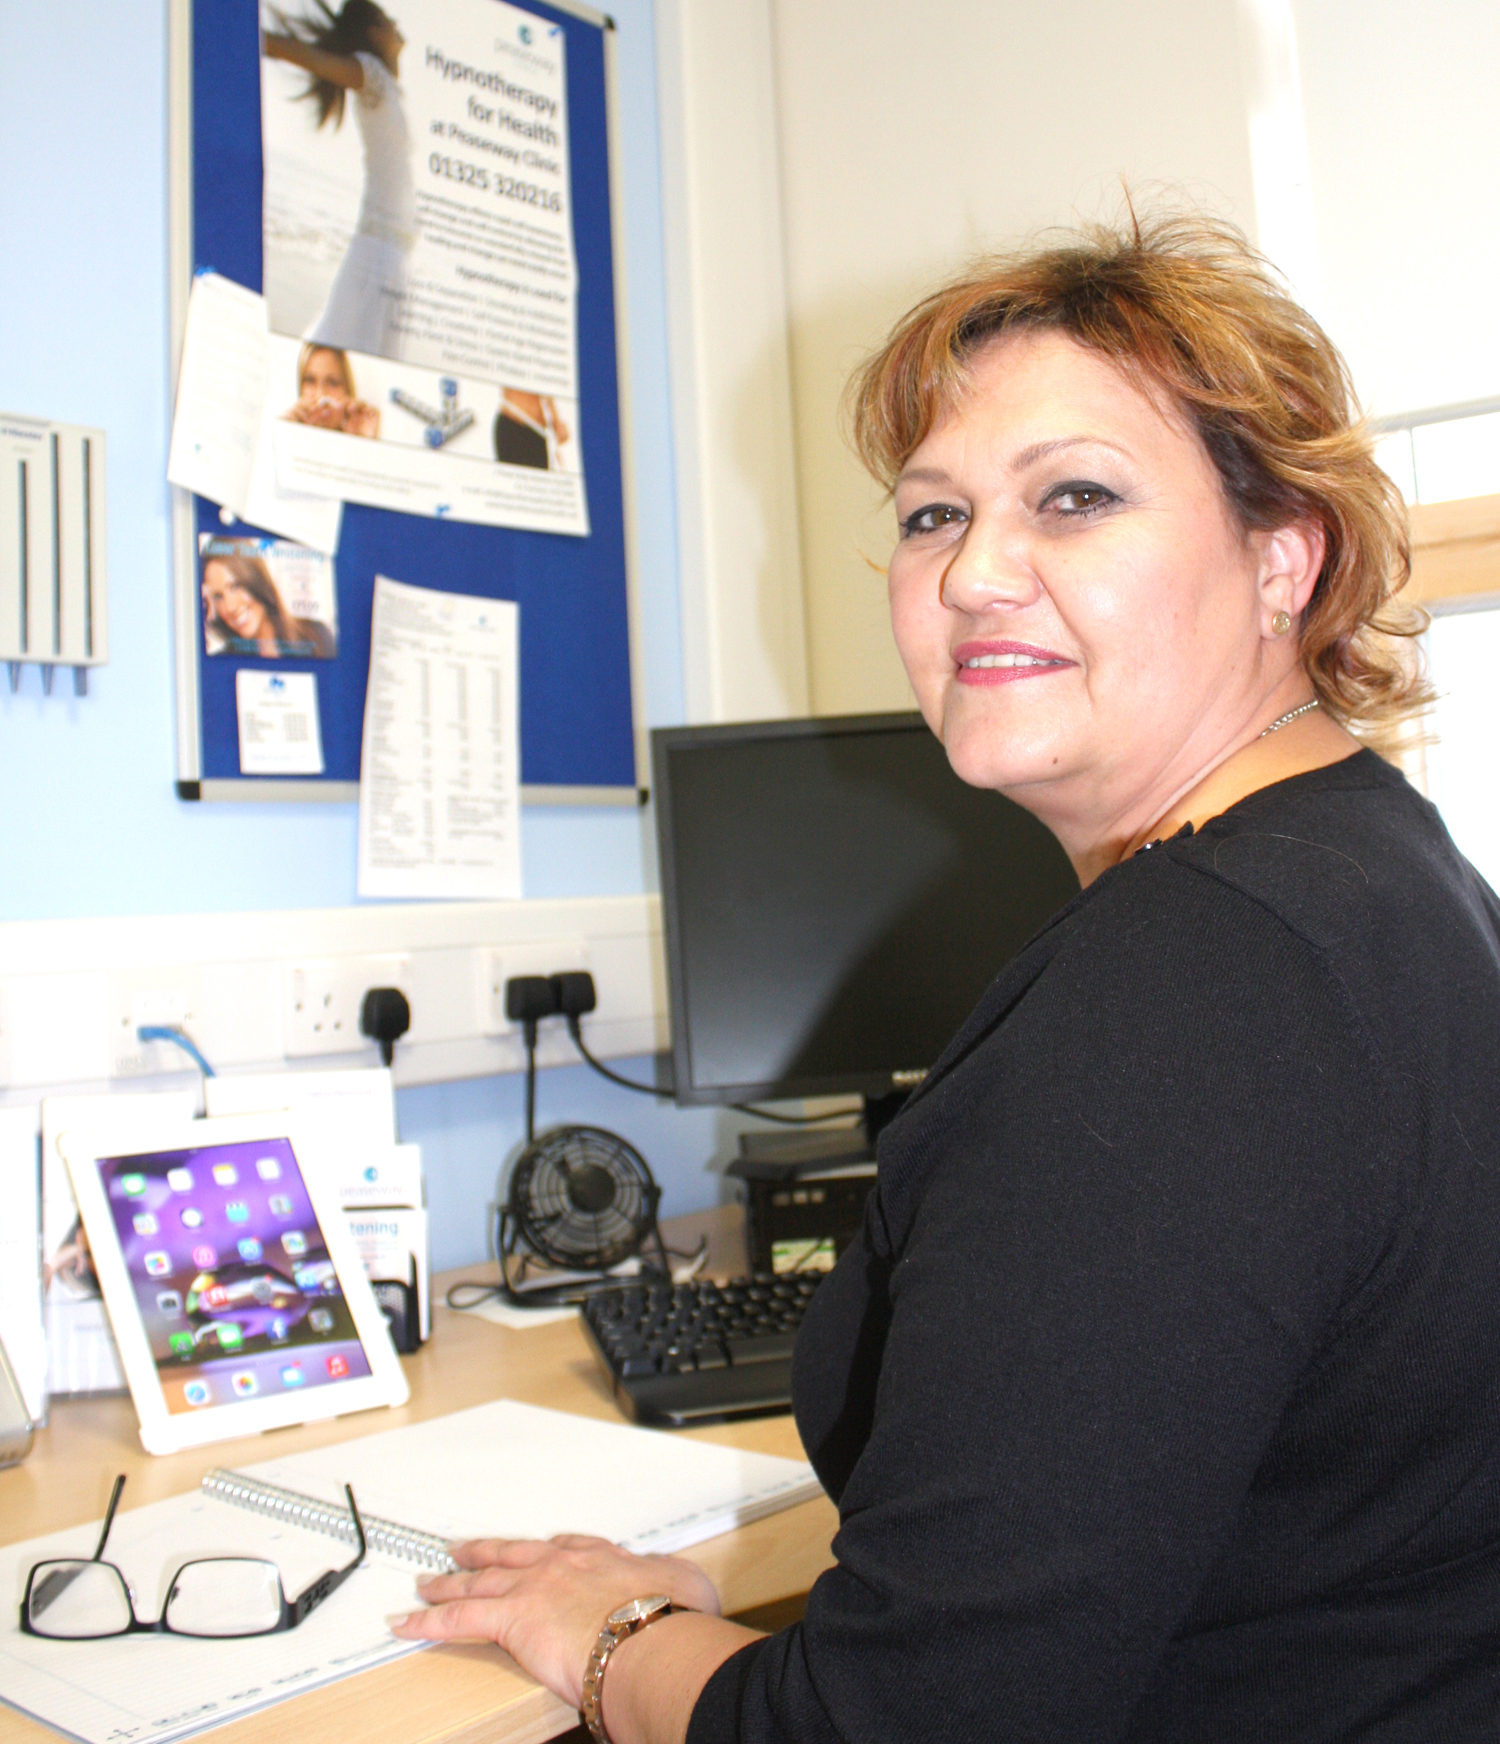 Aycliffe Hypnotherapist Expands Her Business